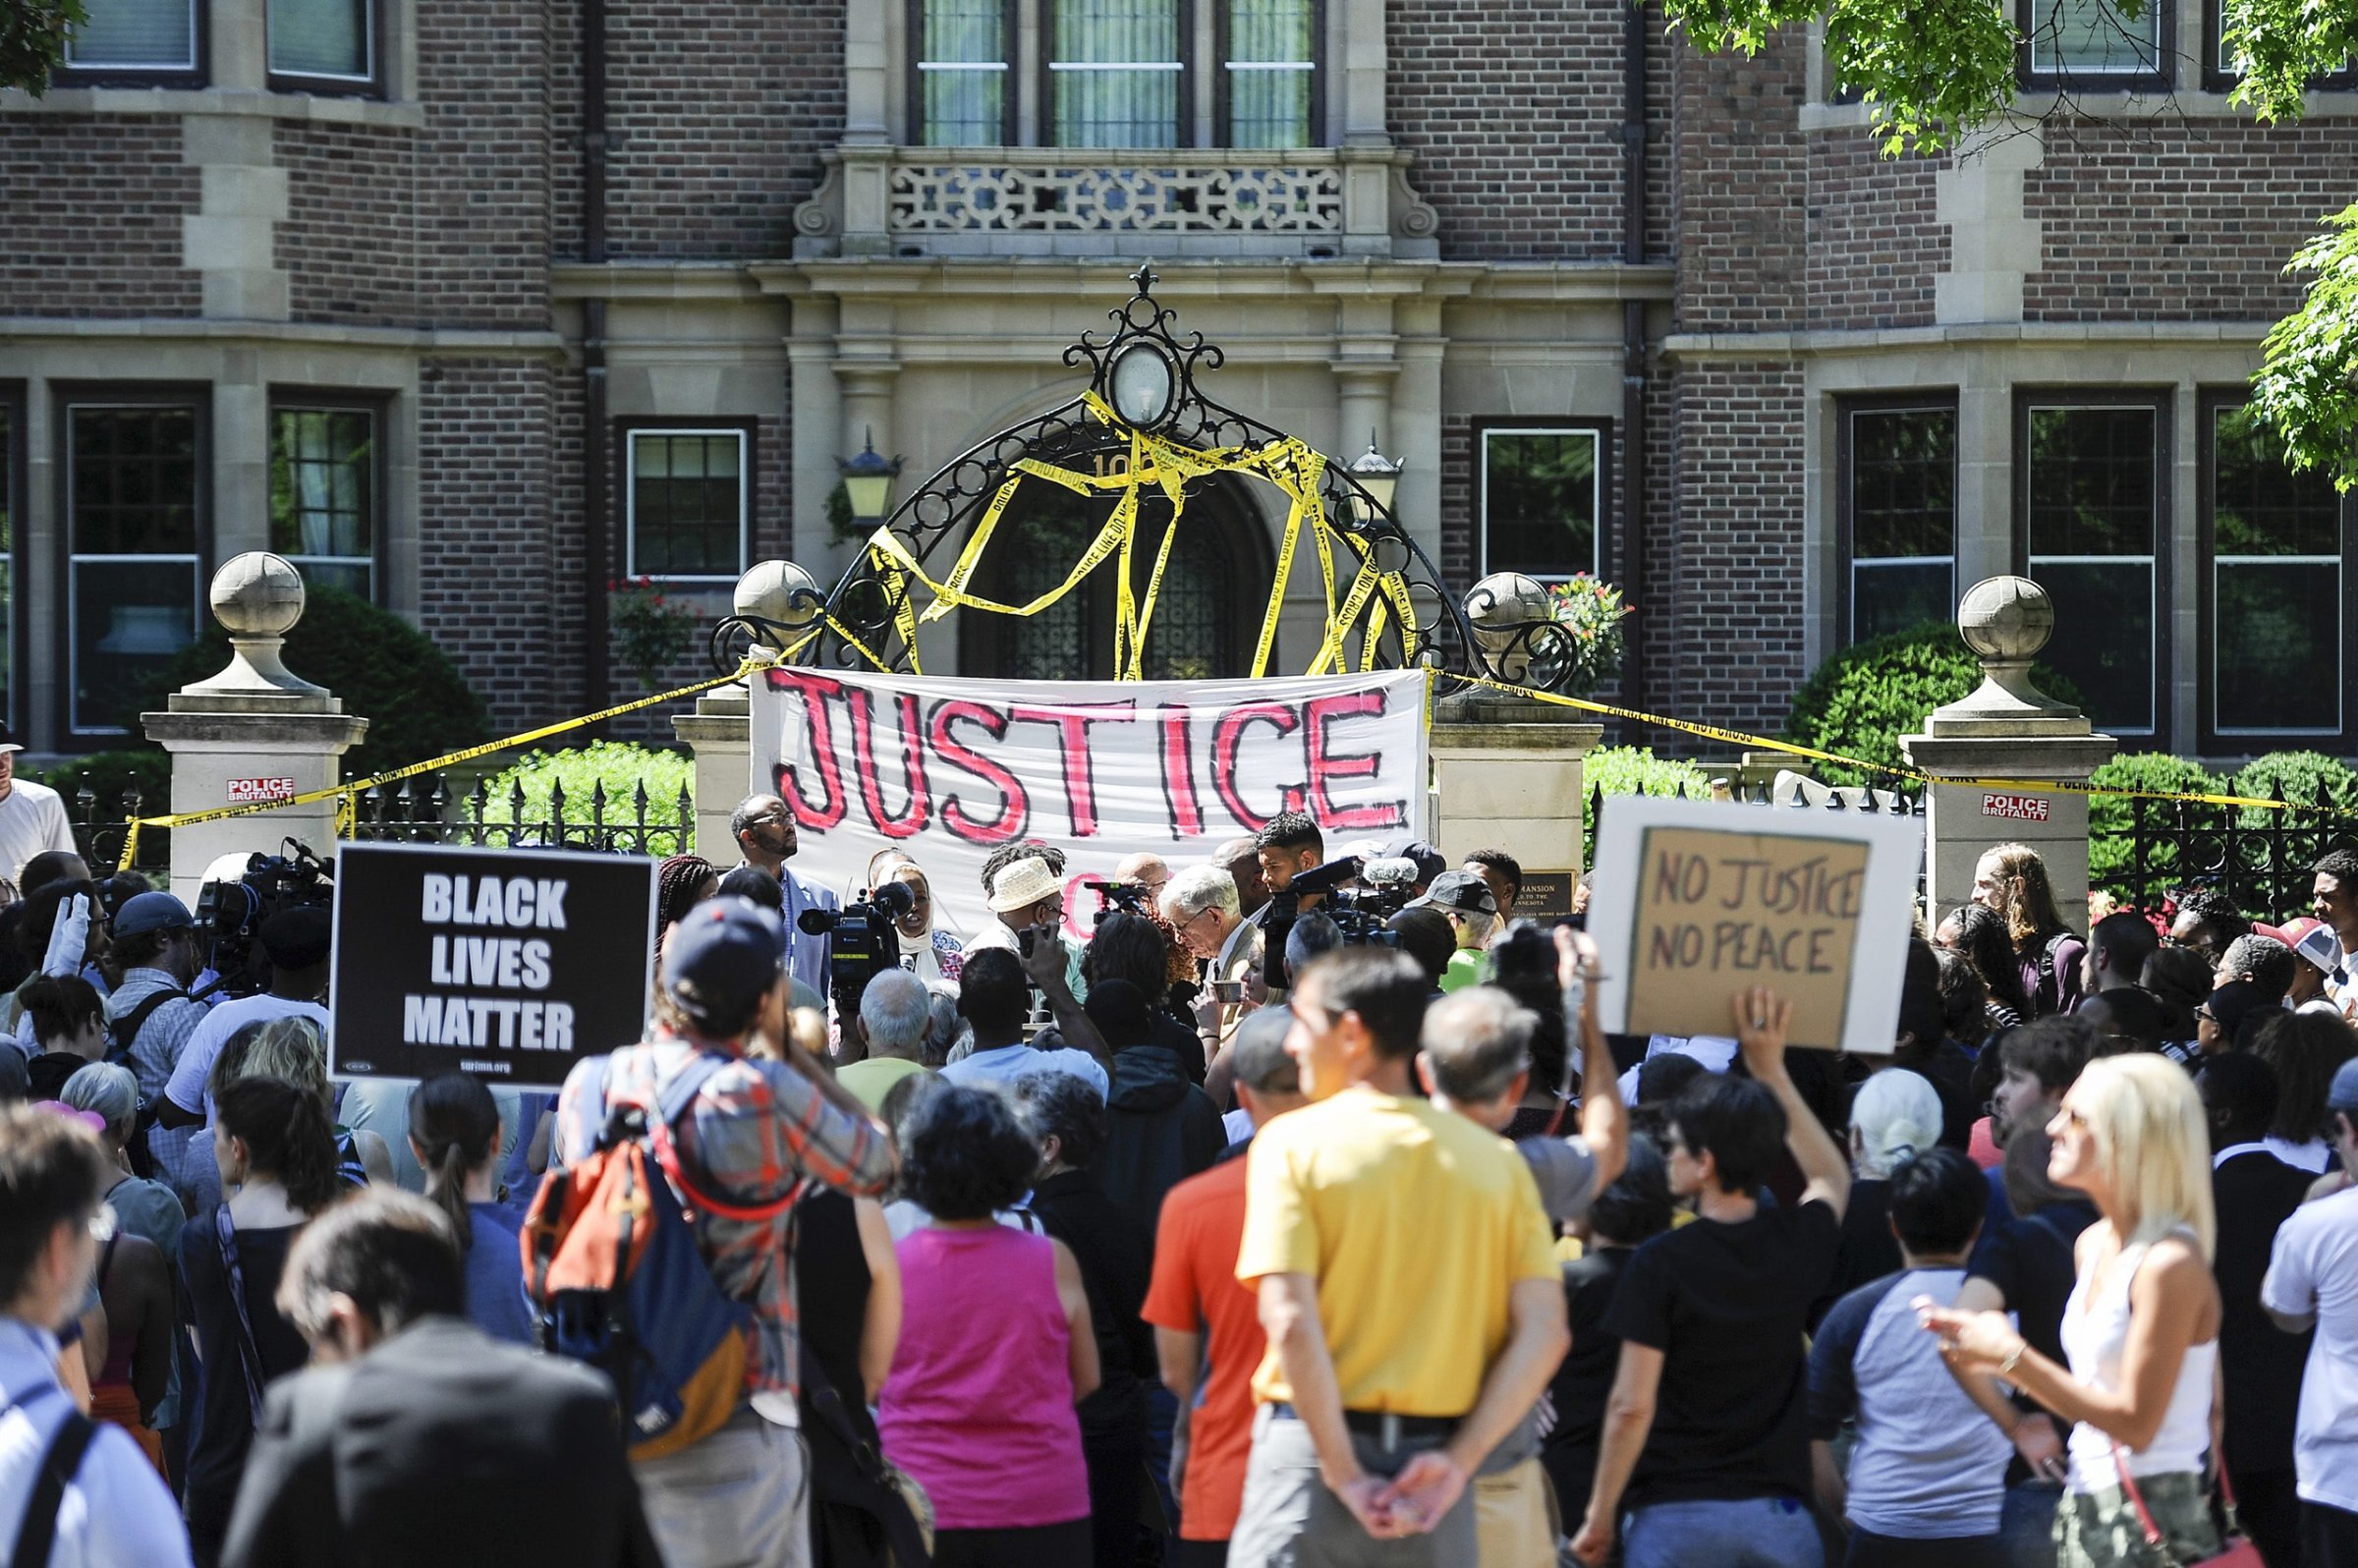 Protesters gather in front of the governor's residence in reaction to the the police shooting of Philando Castile in St. Paul, Minnesota, July 7, 2016.